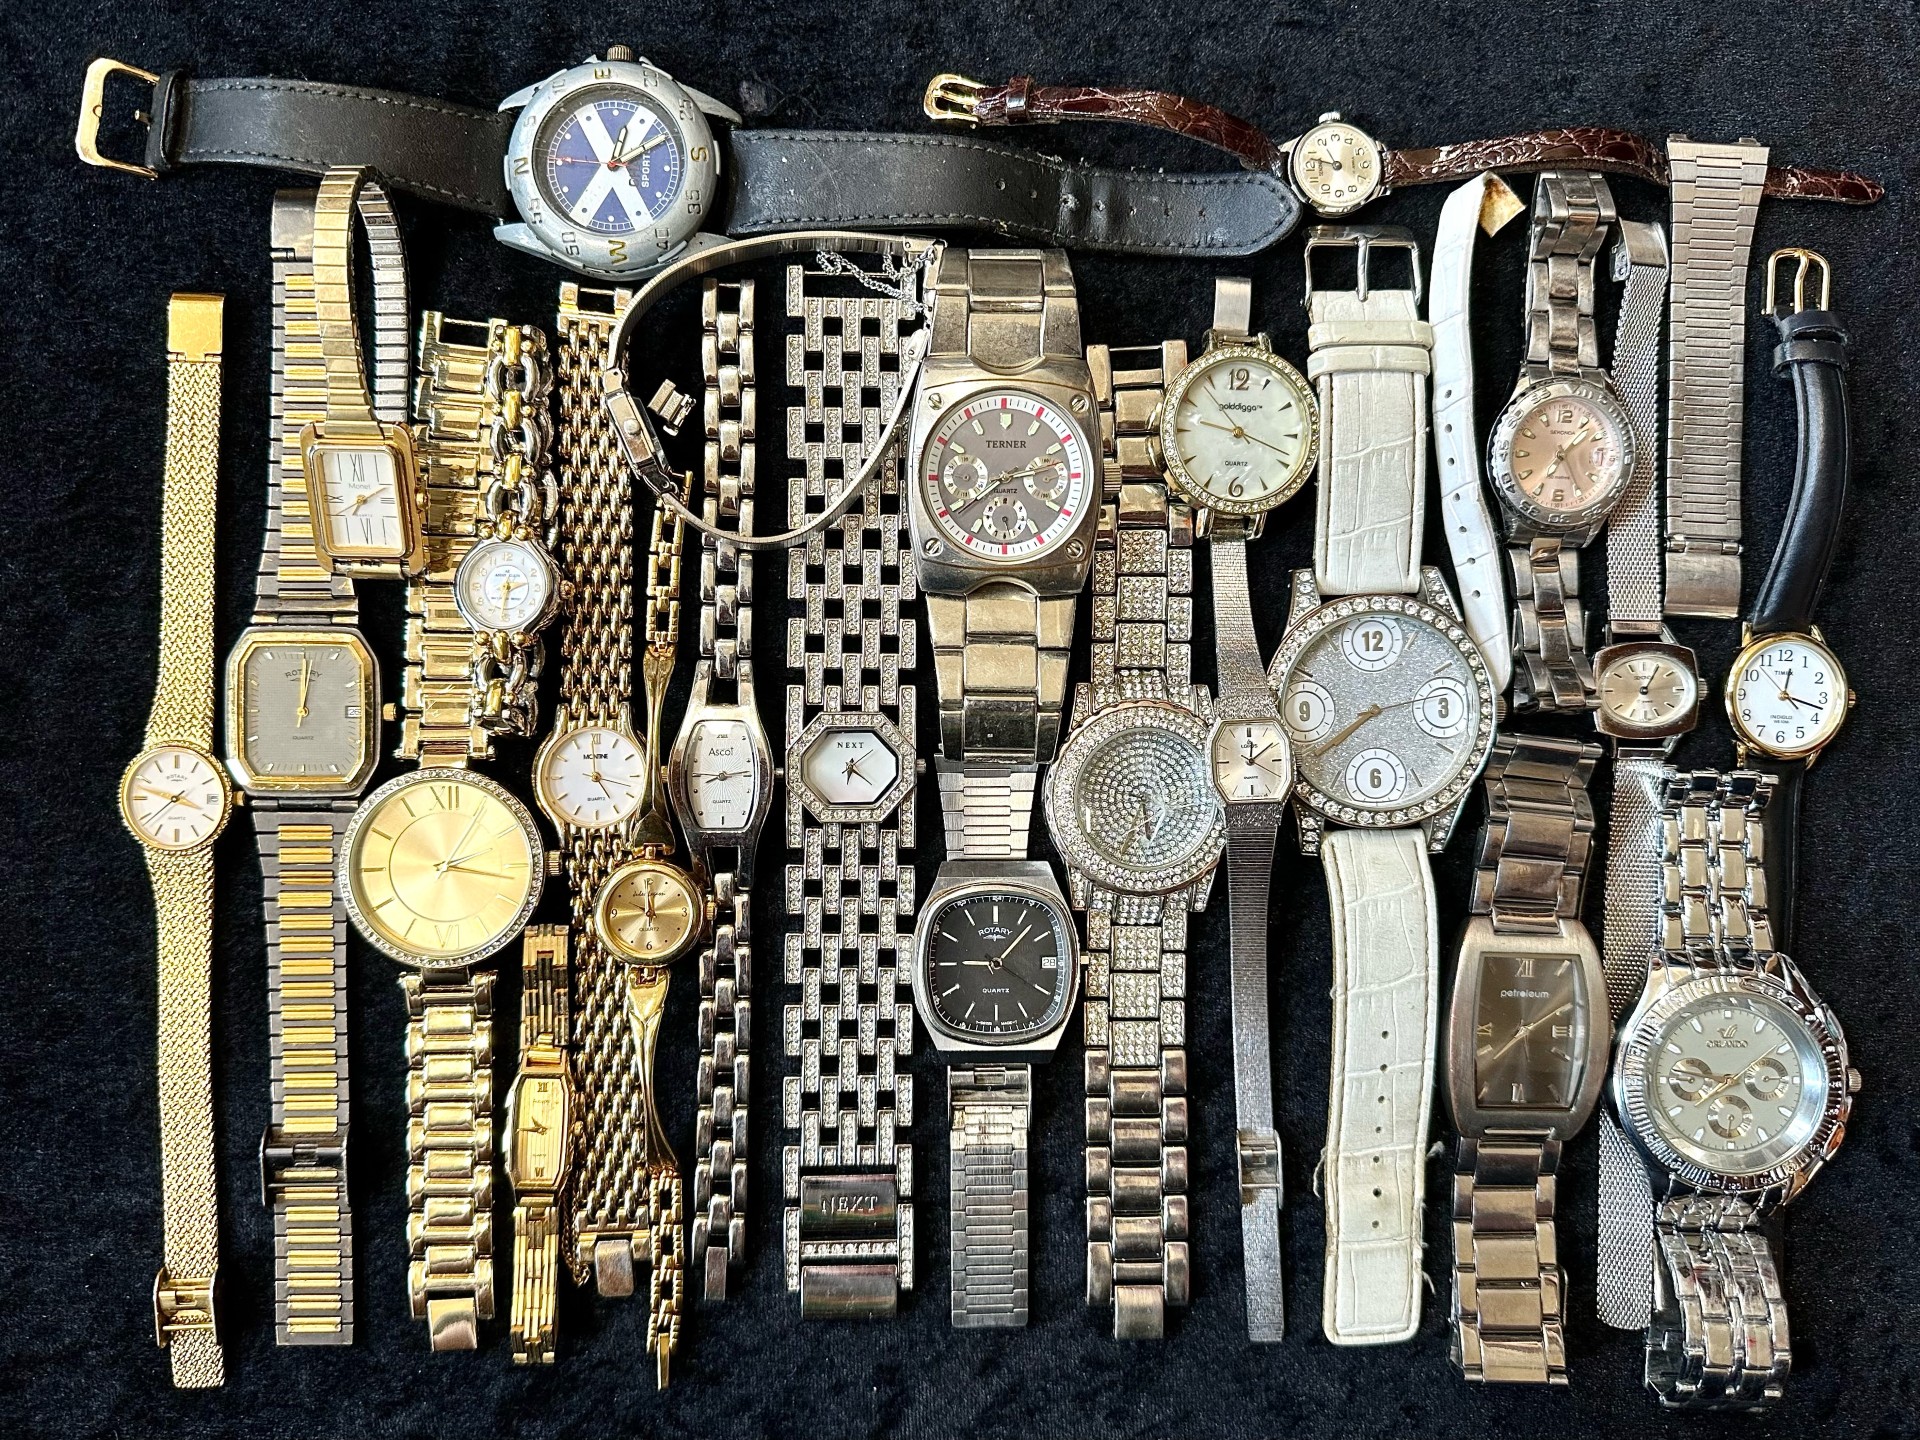 Large Collection of Wrist Watches. gents and ladies watches, lots of different makes and models.